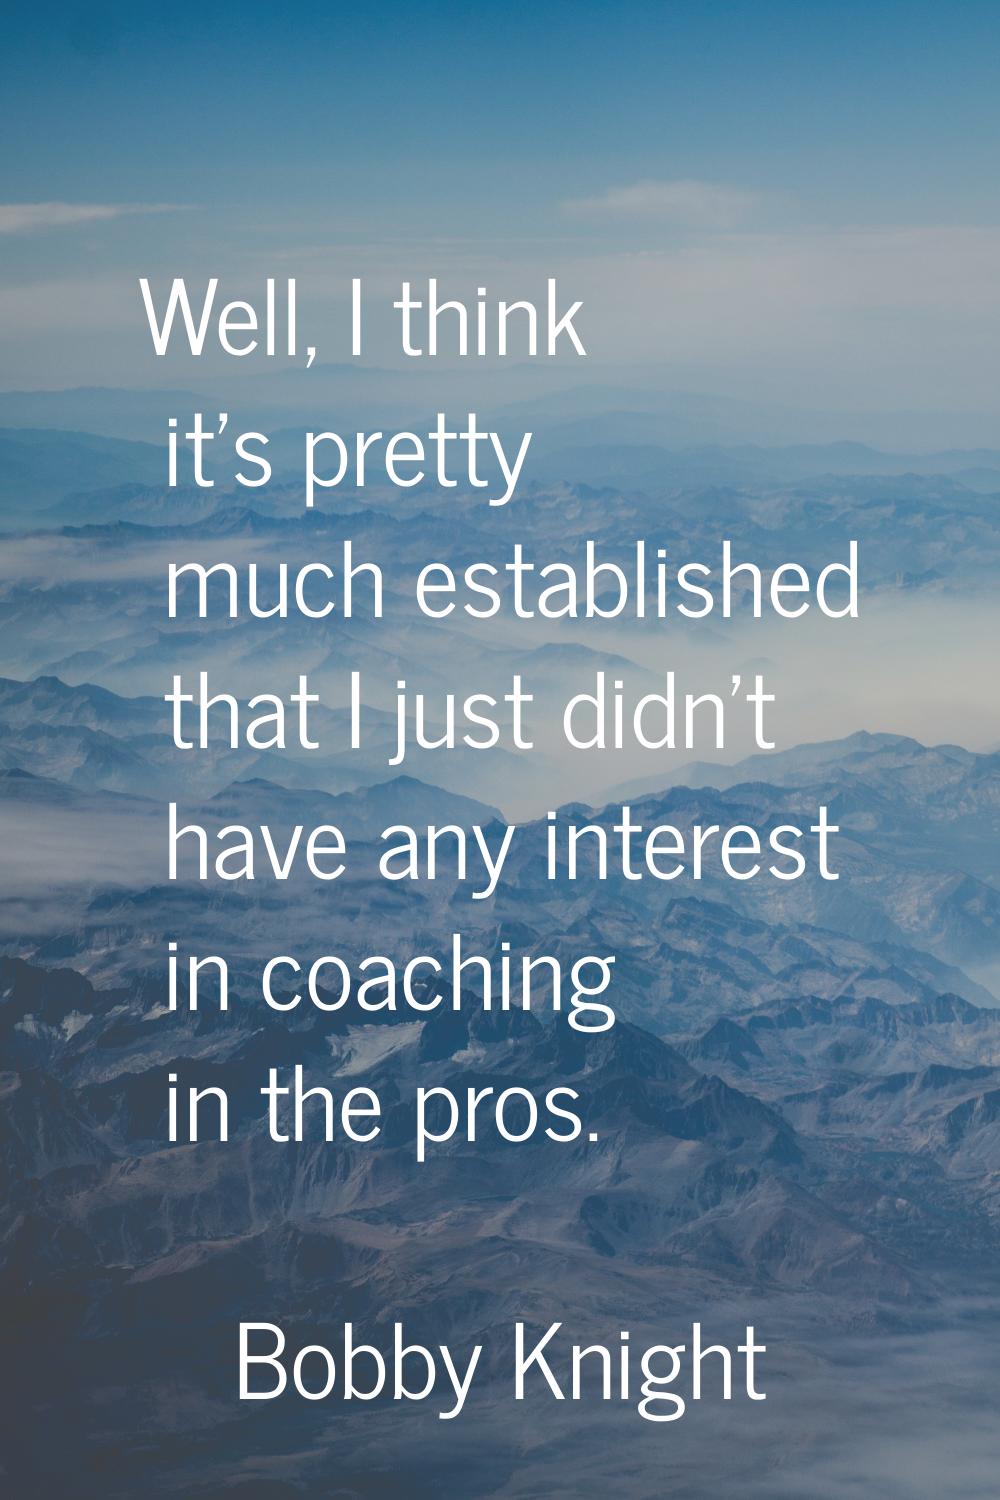 Well, I think it's pretty much established that I just didn't have any interest in coaching in the 